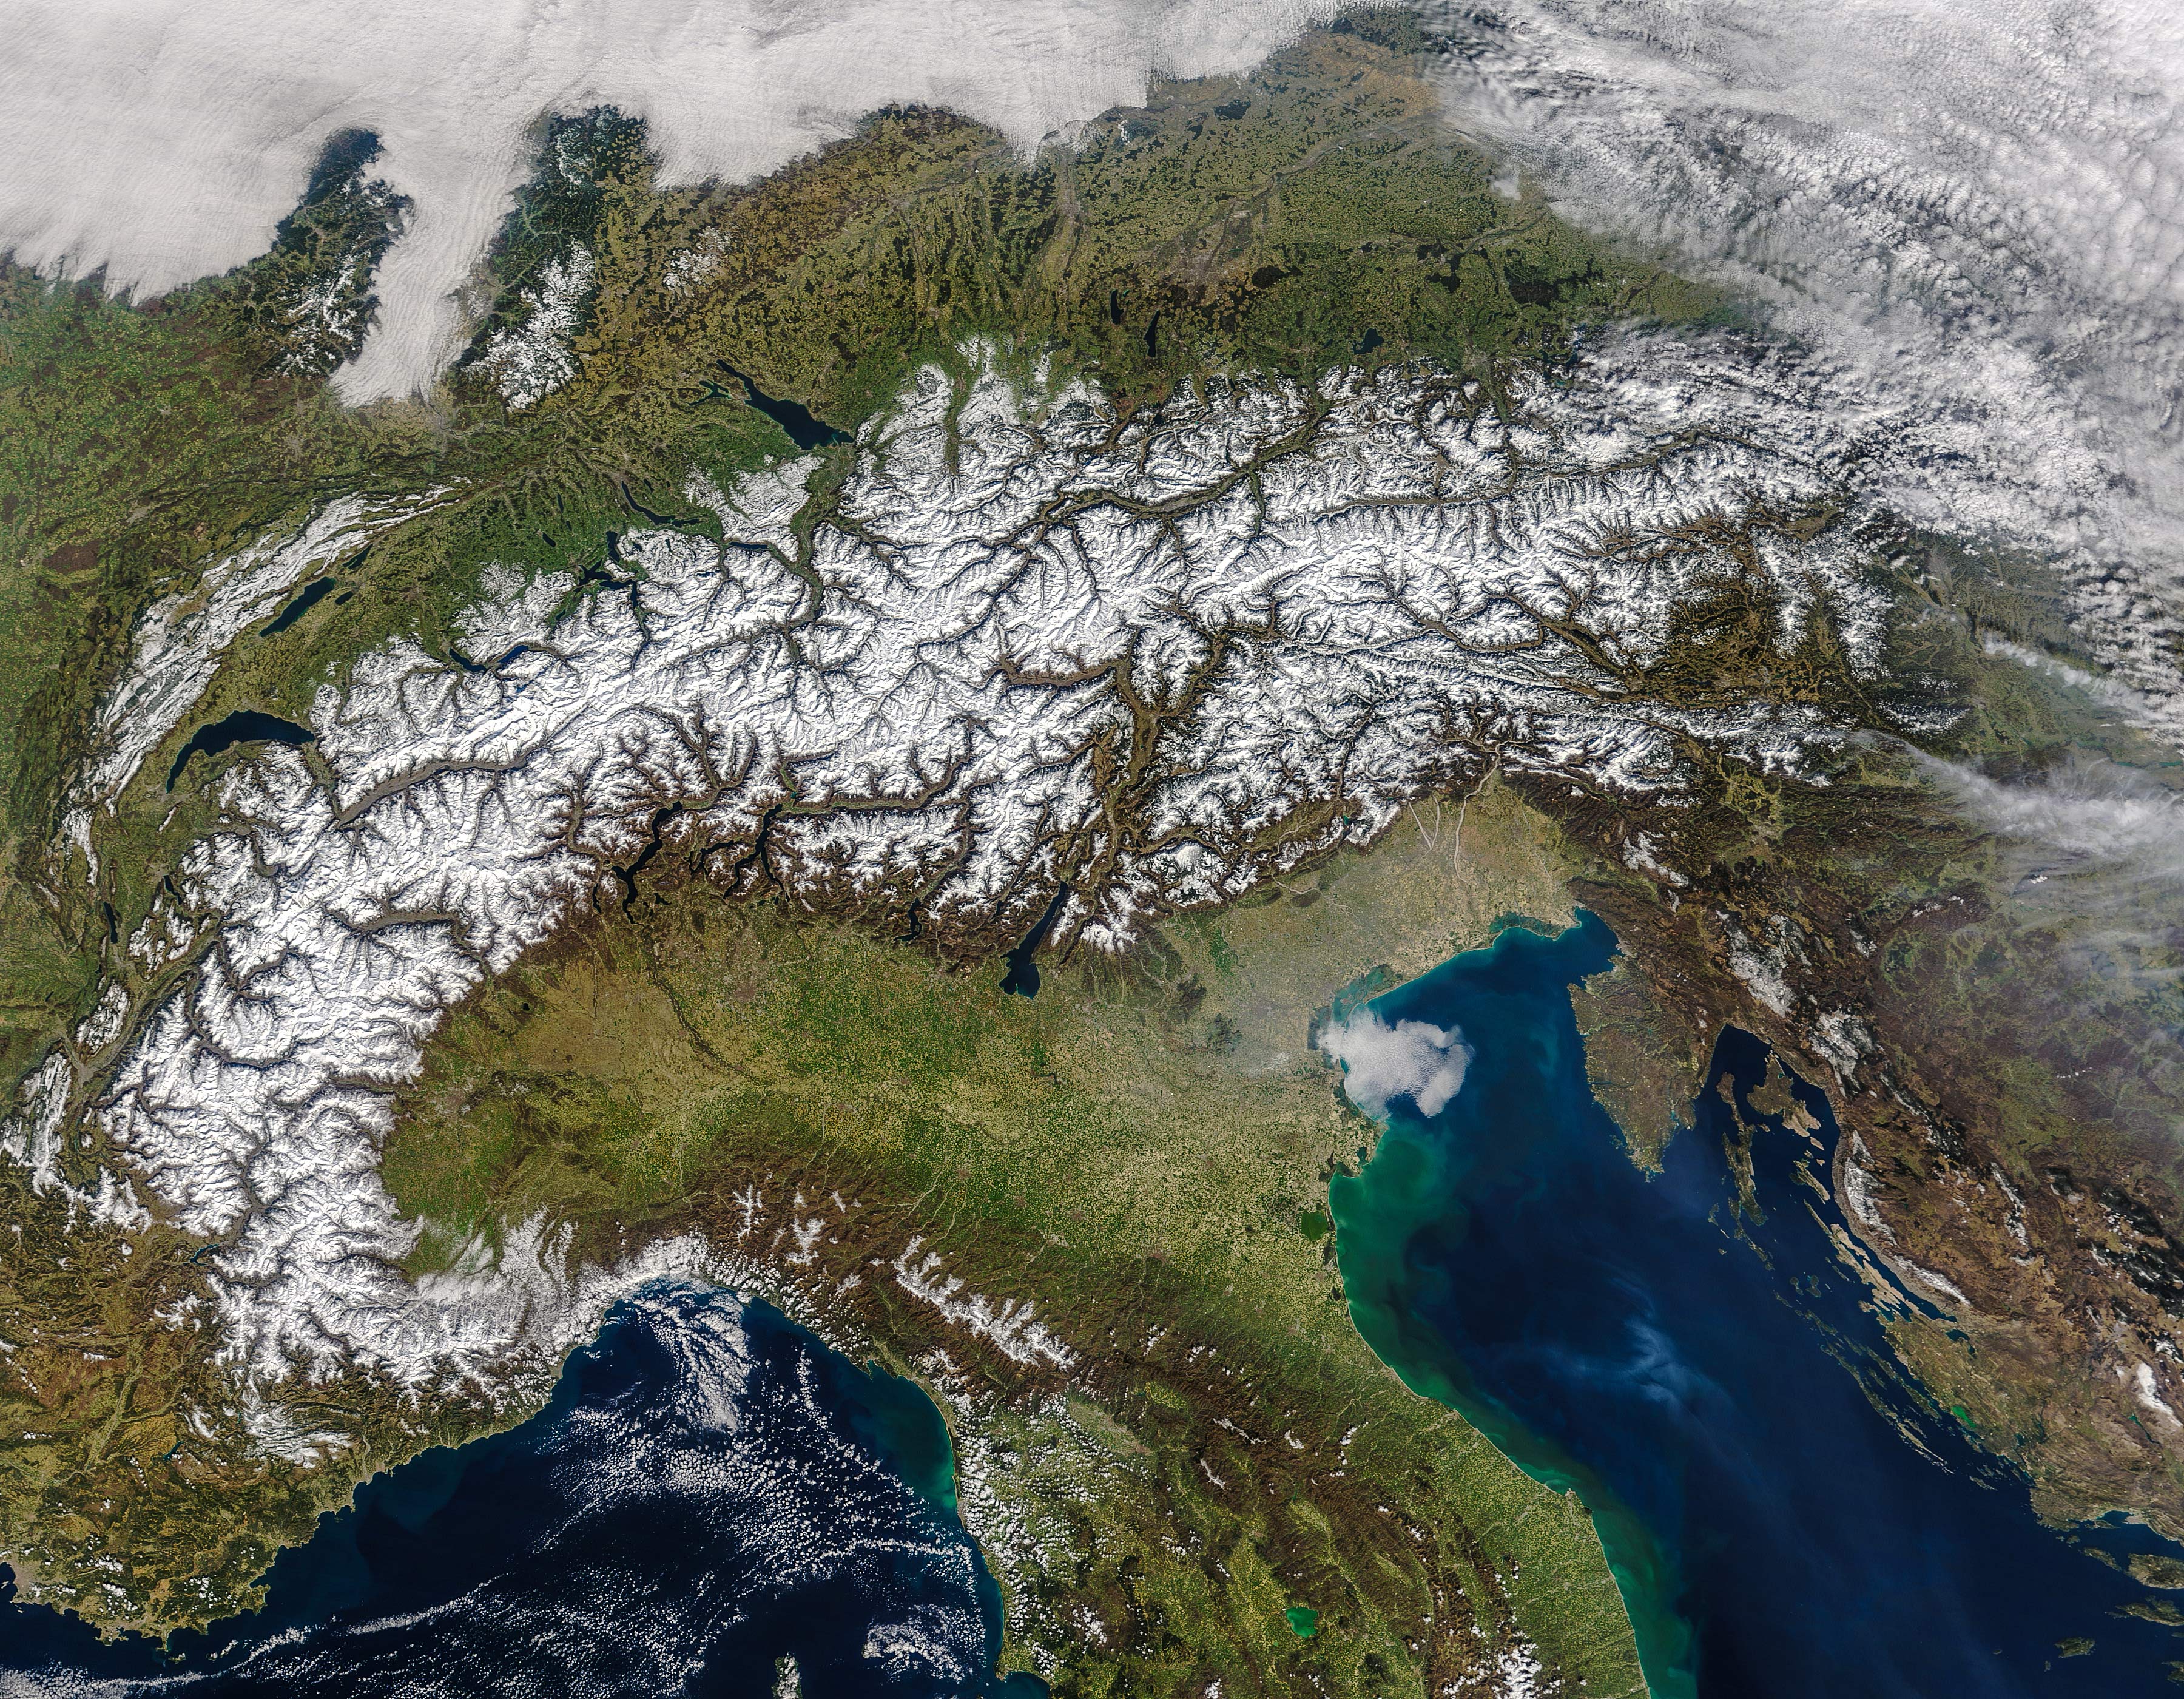 Spring Snow Cover in The Alps